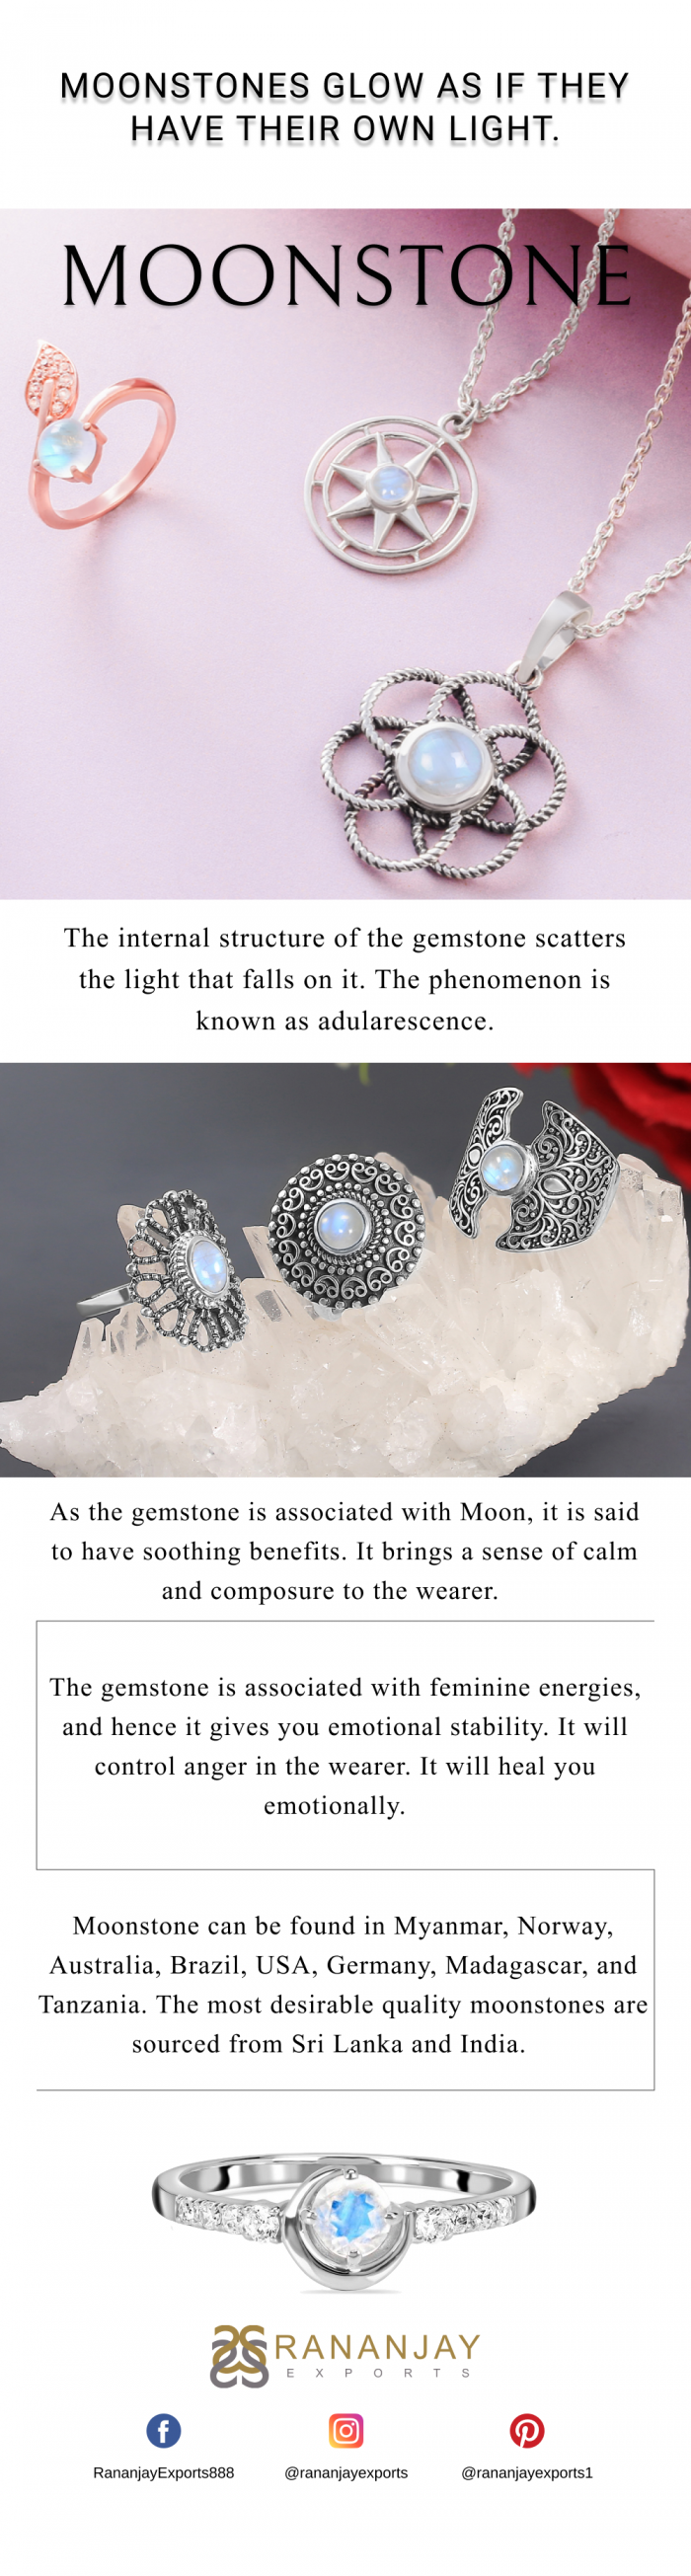 Moonstones glow as if they have their own light